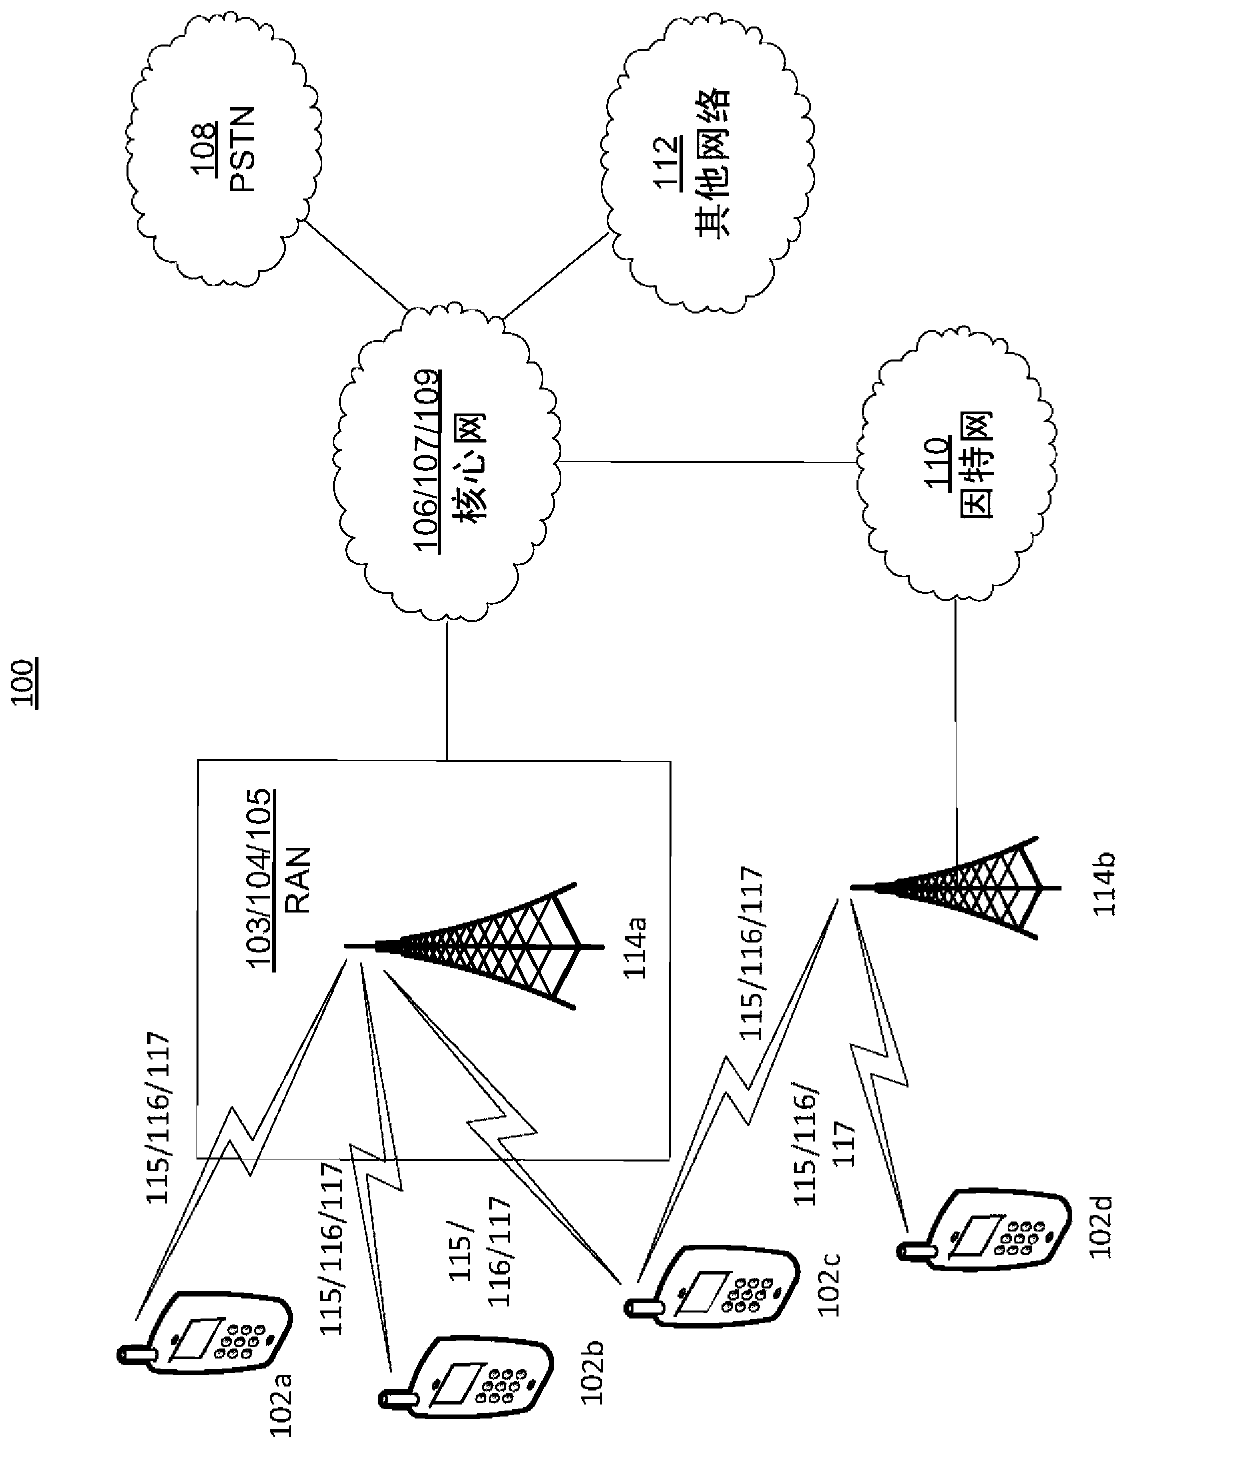 Relay node interface related layer 2 measurements and relay node handling in network load balancing